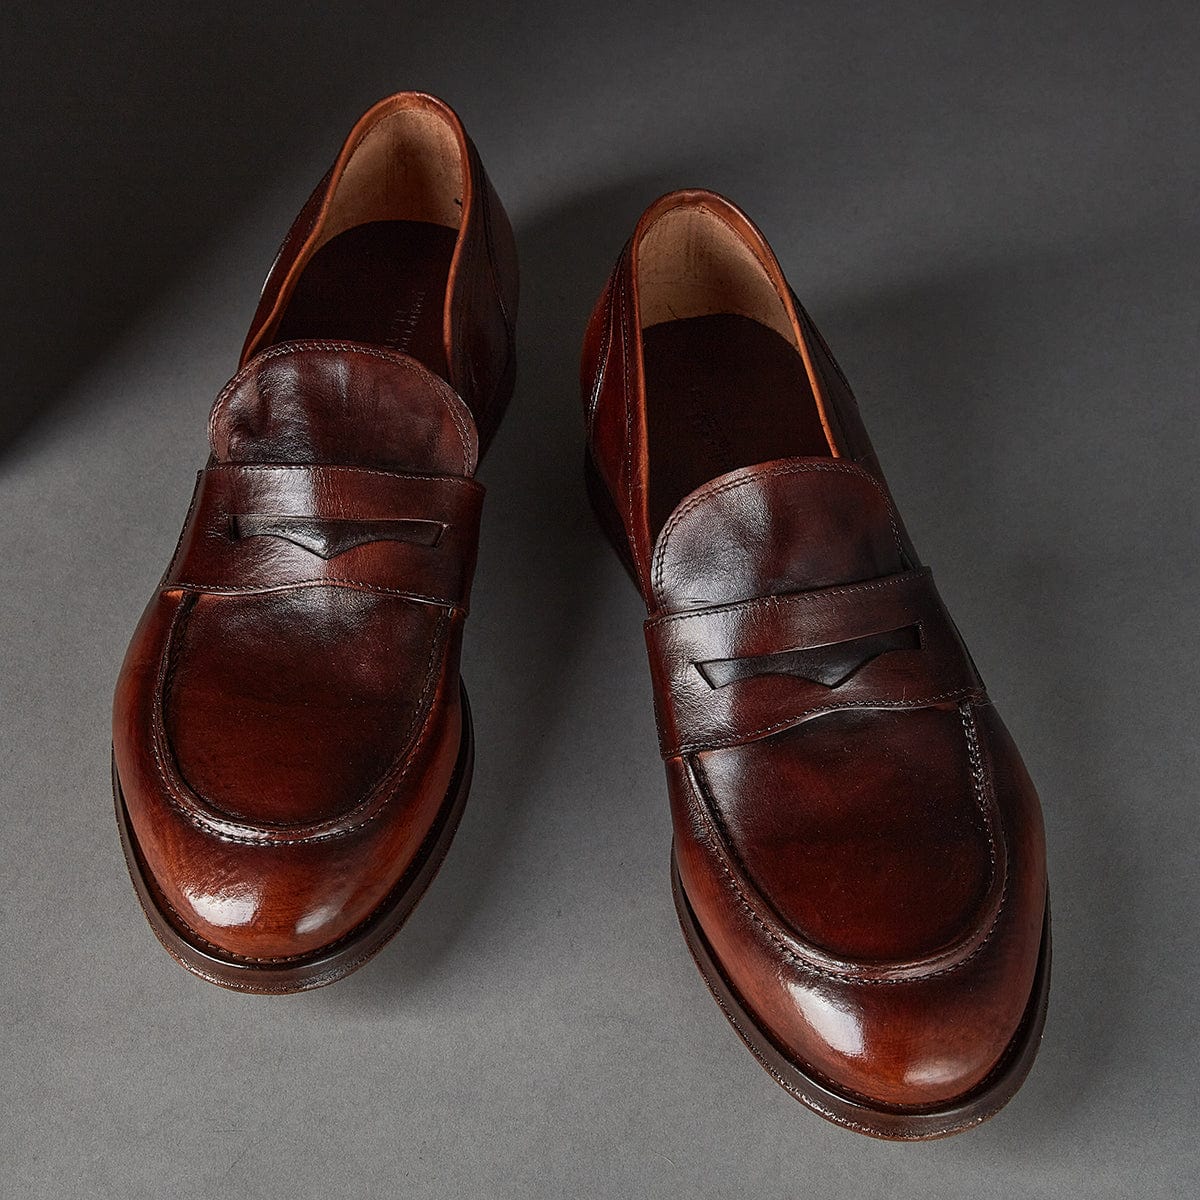 Conflict For Interest Loafer Conflict For Interest Renato Brown